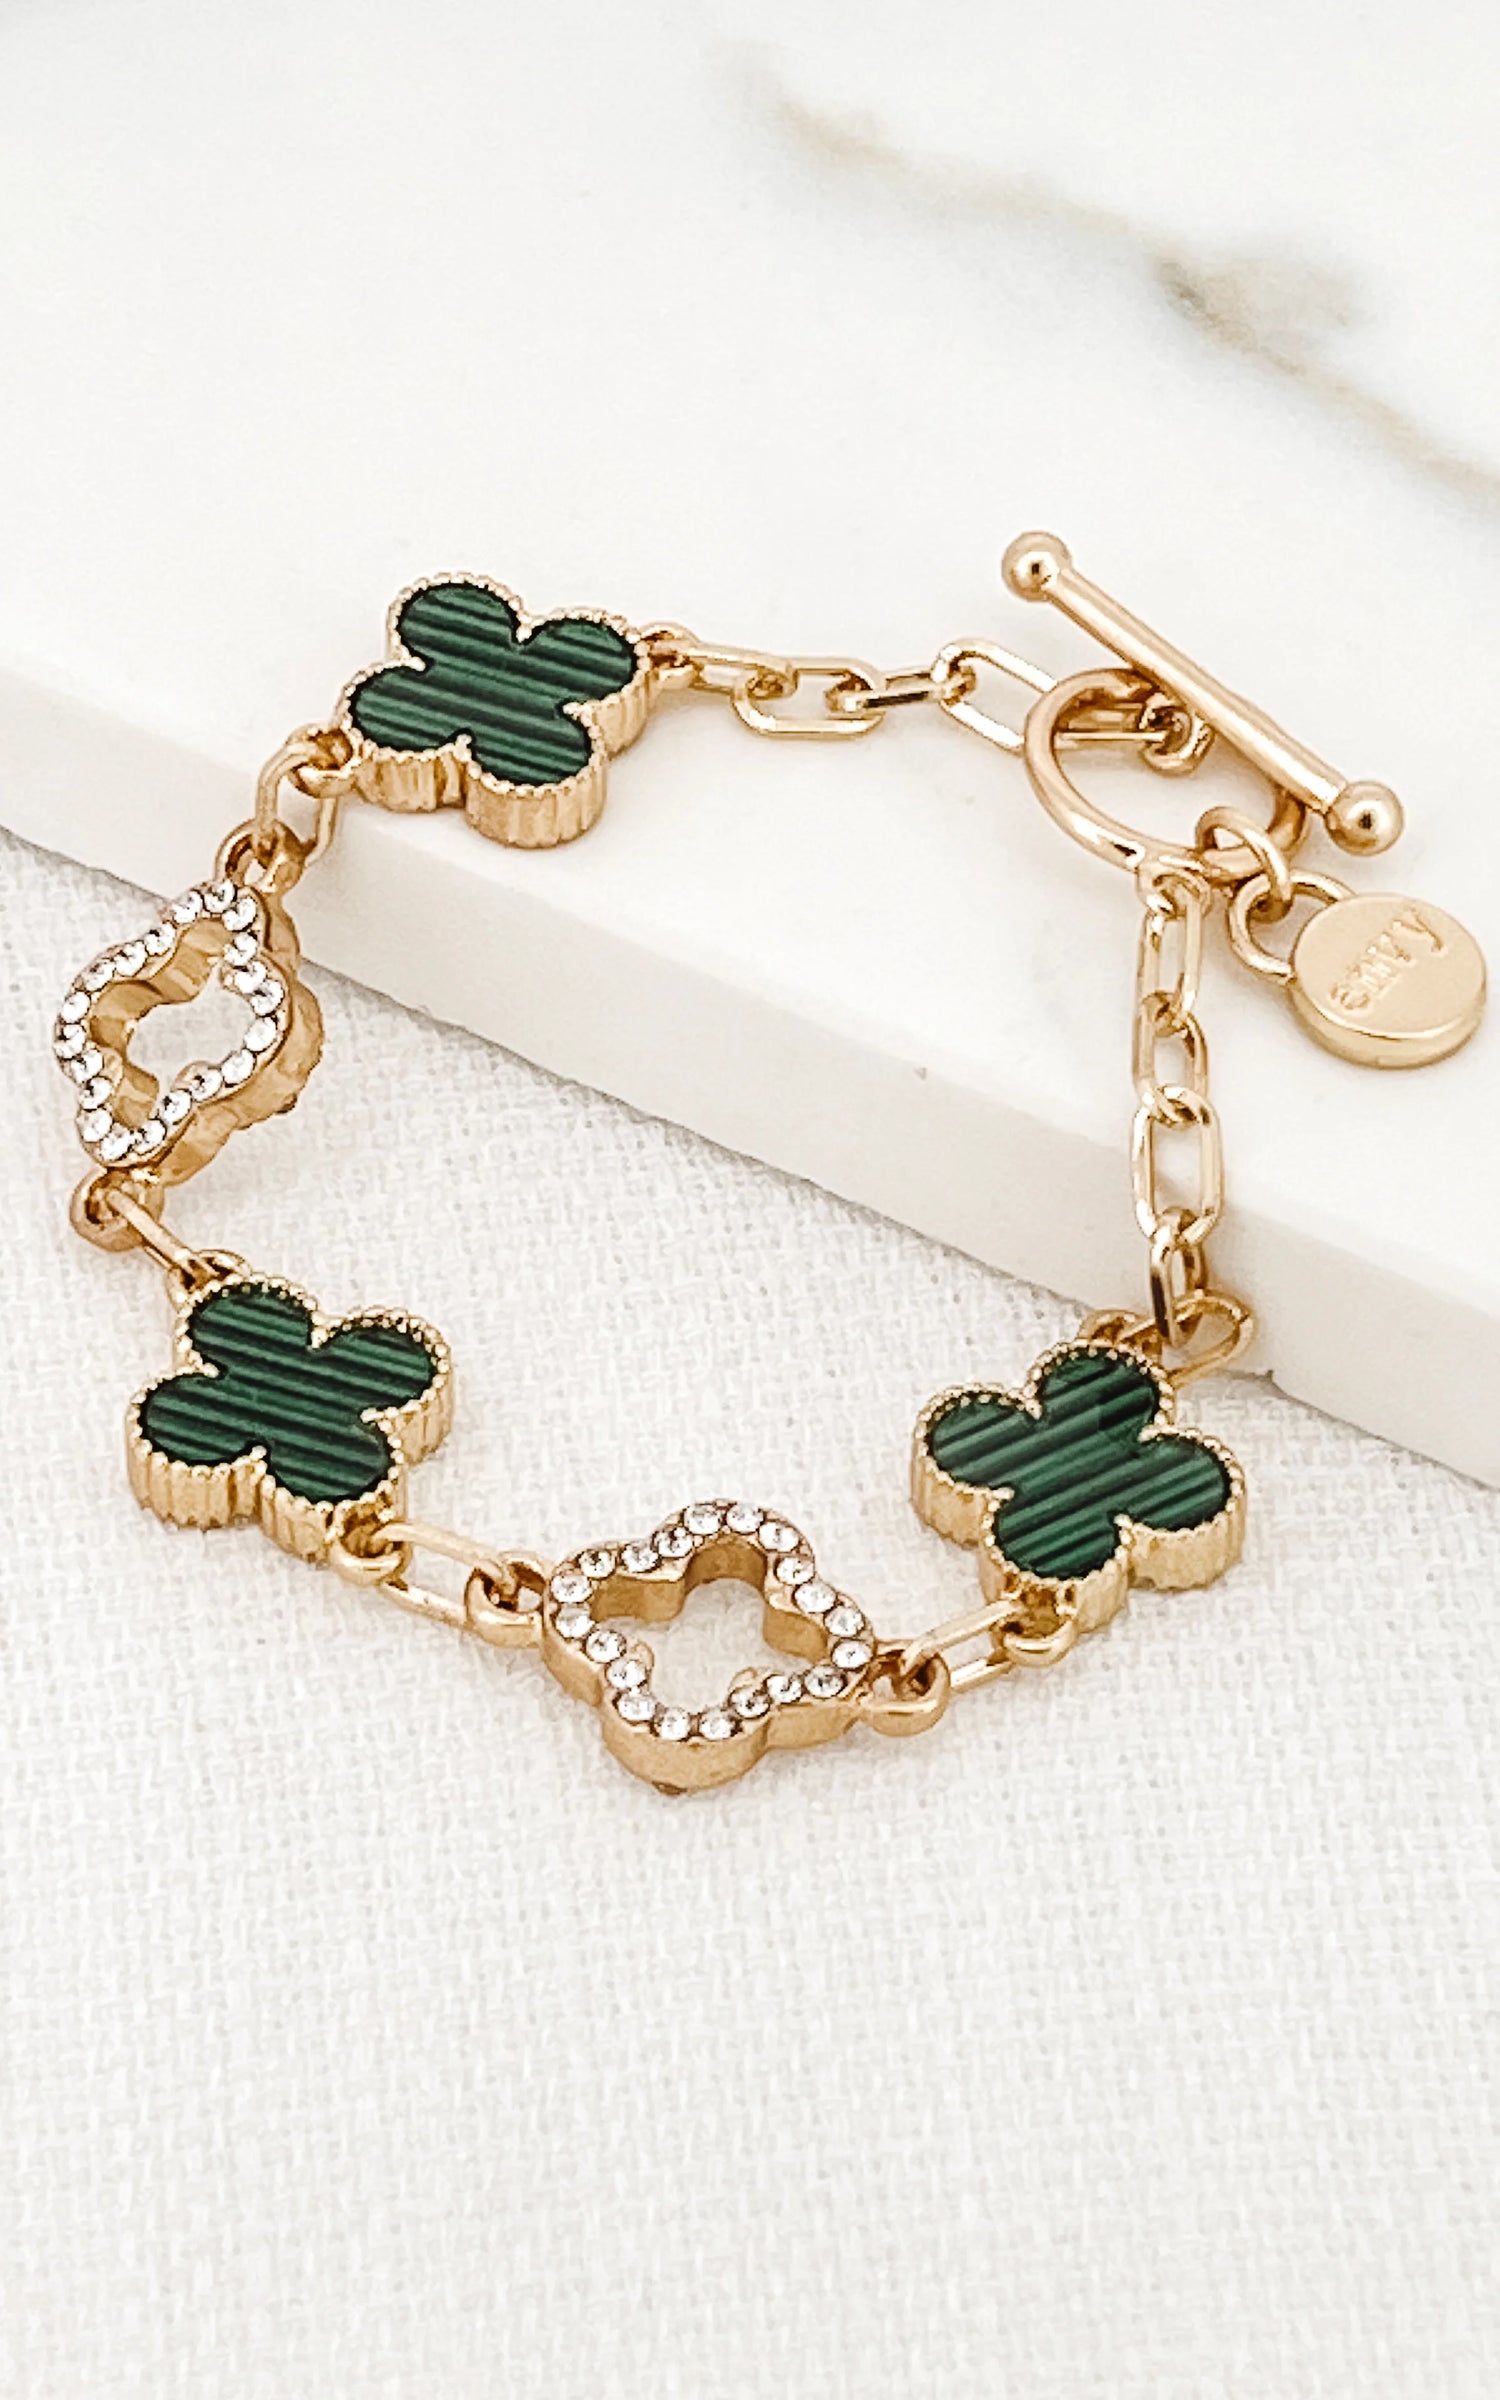 Chain Bracelet Green And Gold